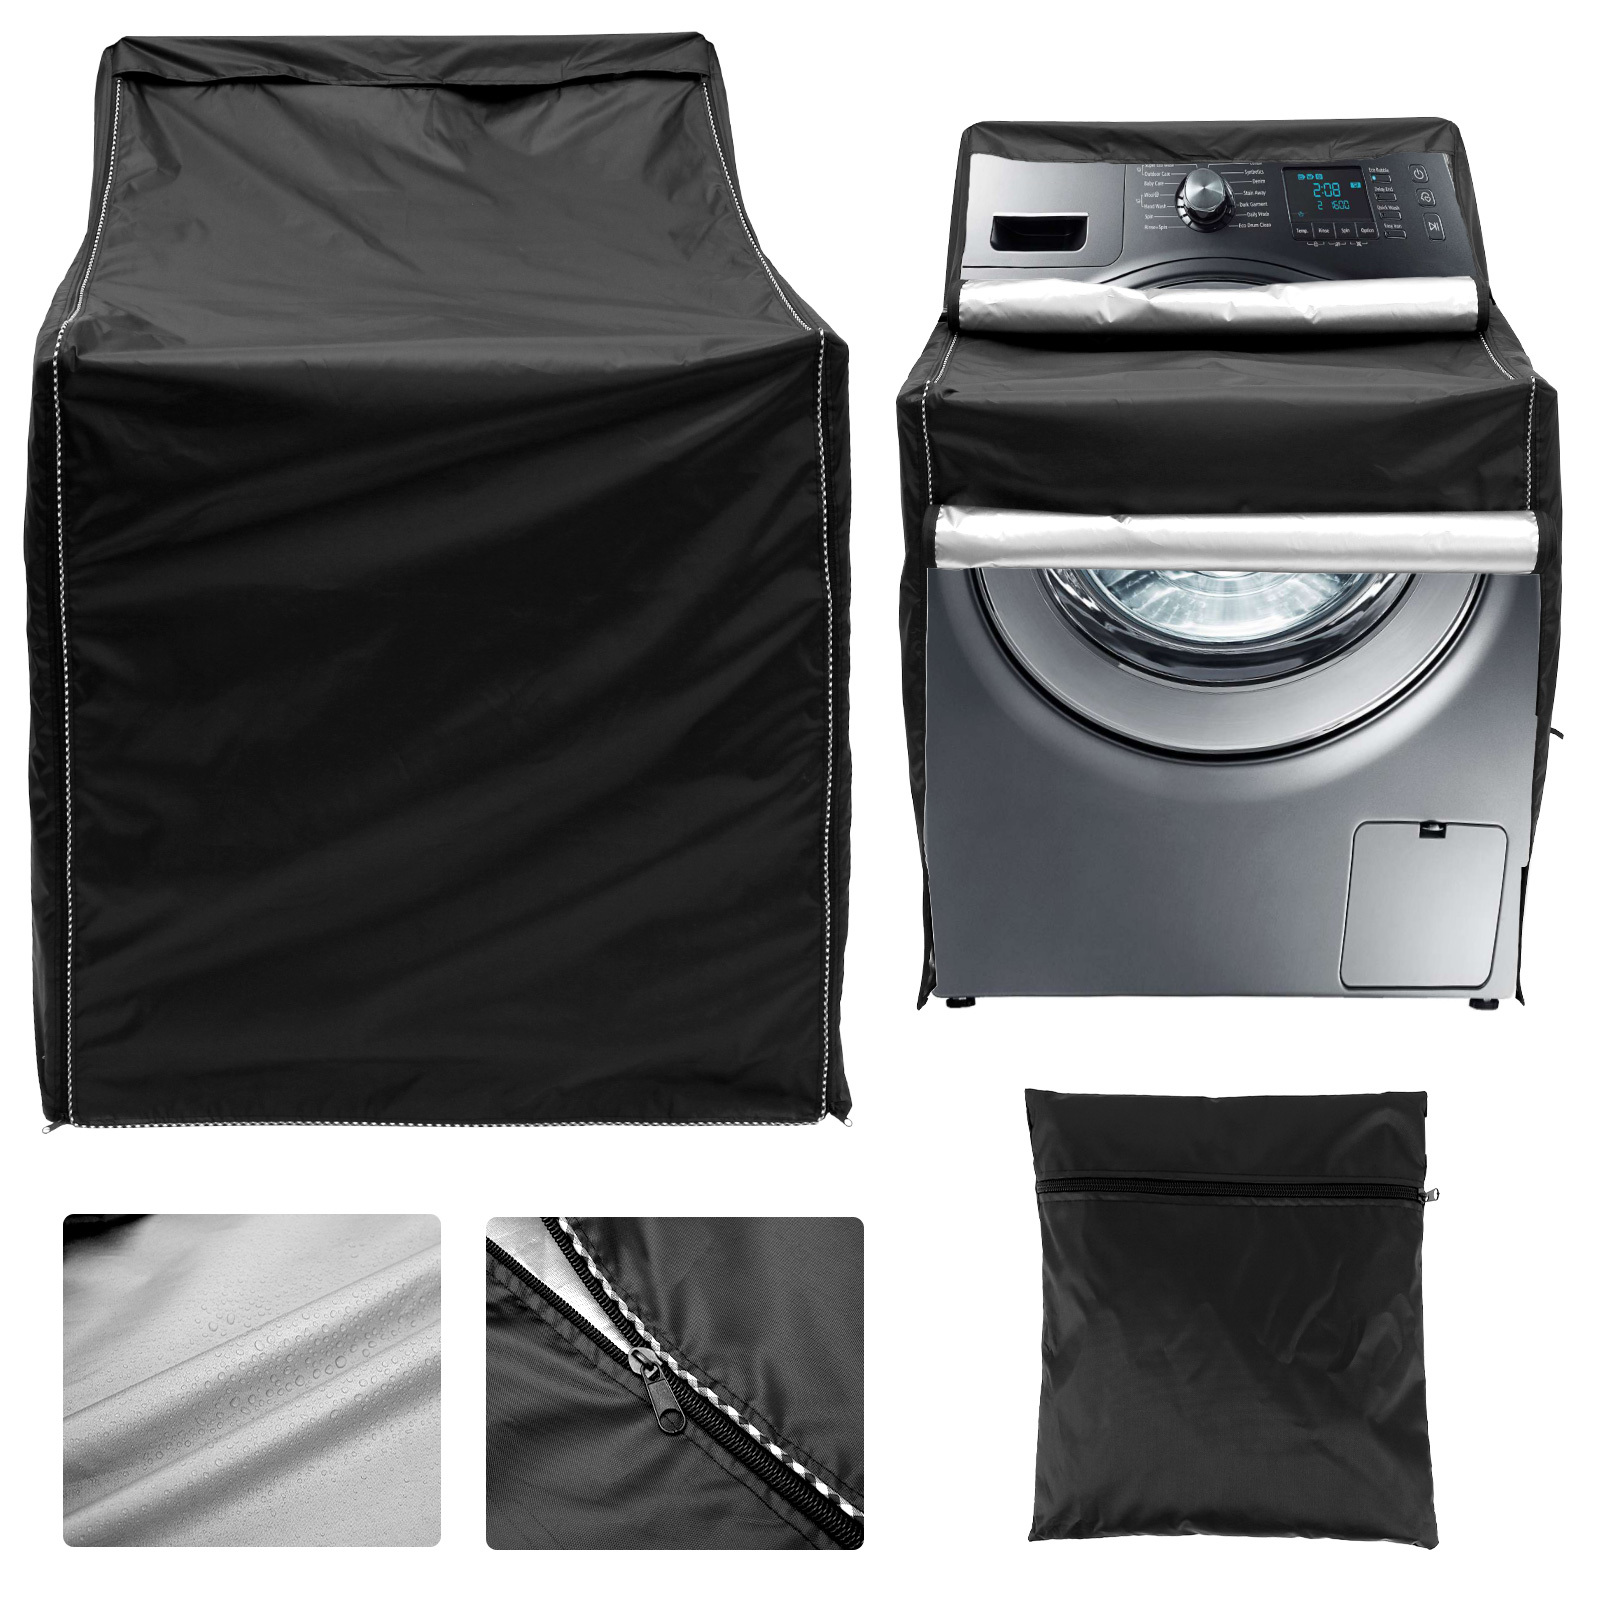 Washing Machine Cover Durable Washer Cover Waterproof Polyester